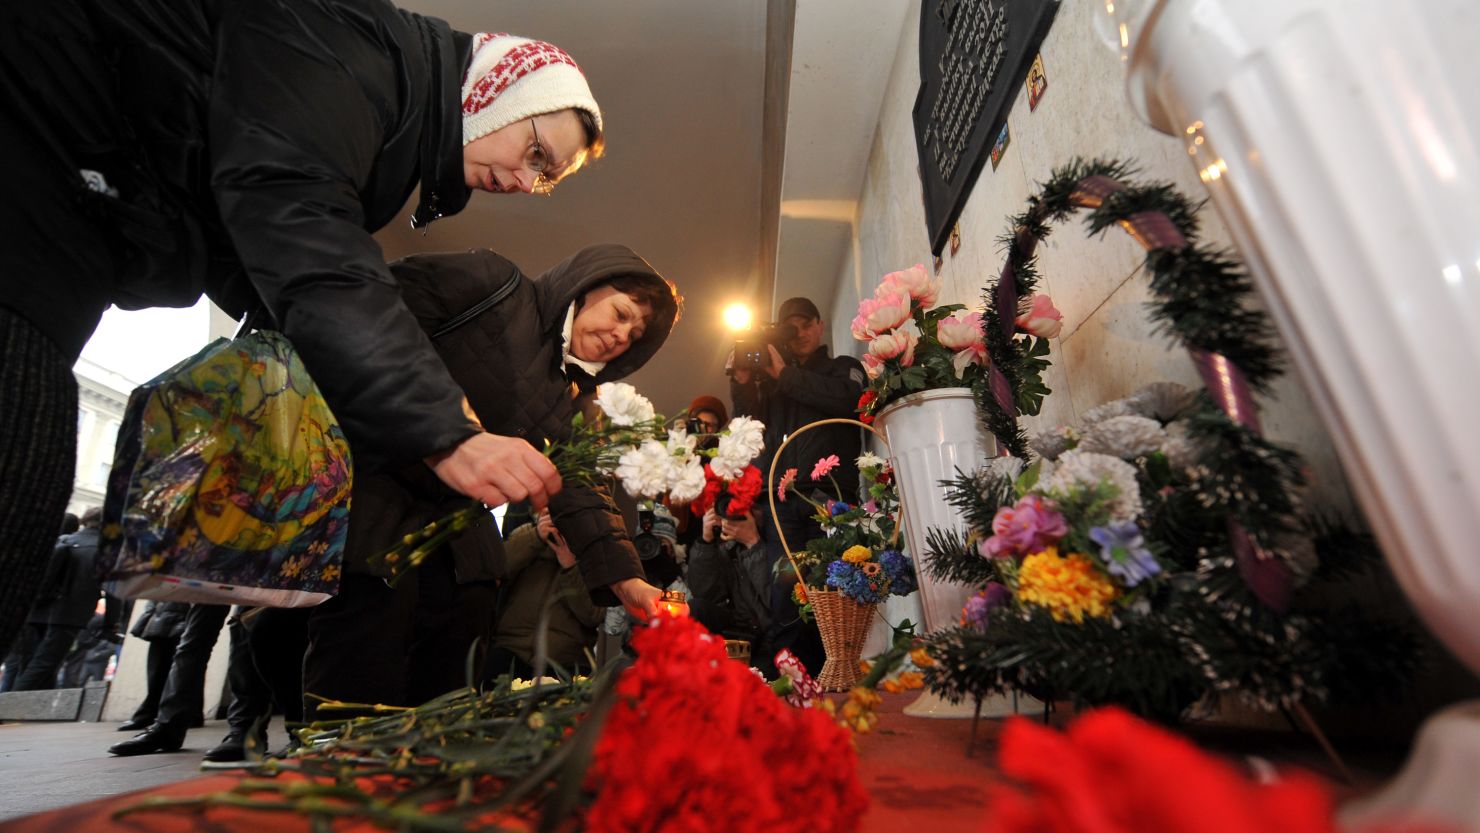 People place candles and lay flowers Friday at a memorial for the victims of last year's subway bombing in Minsk.